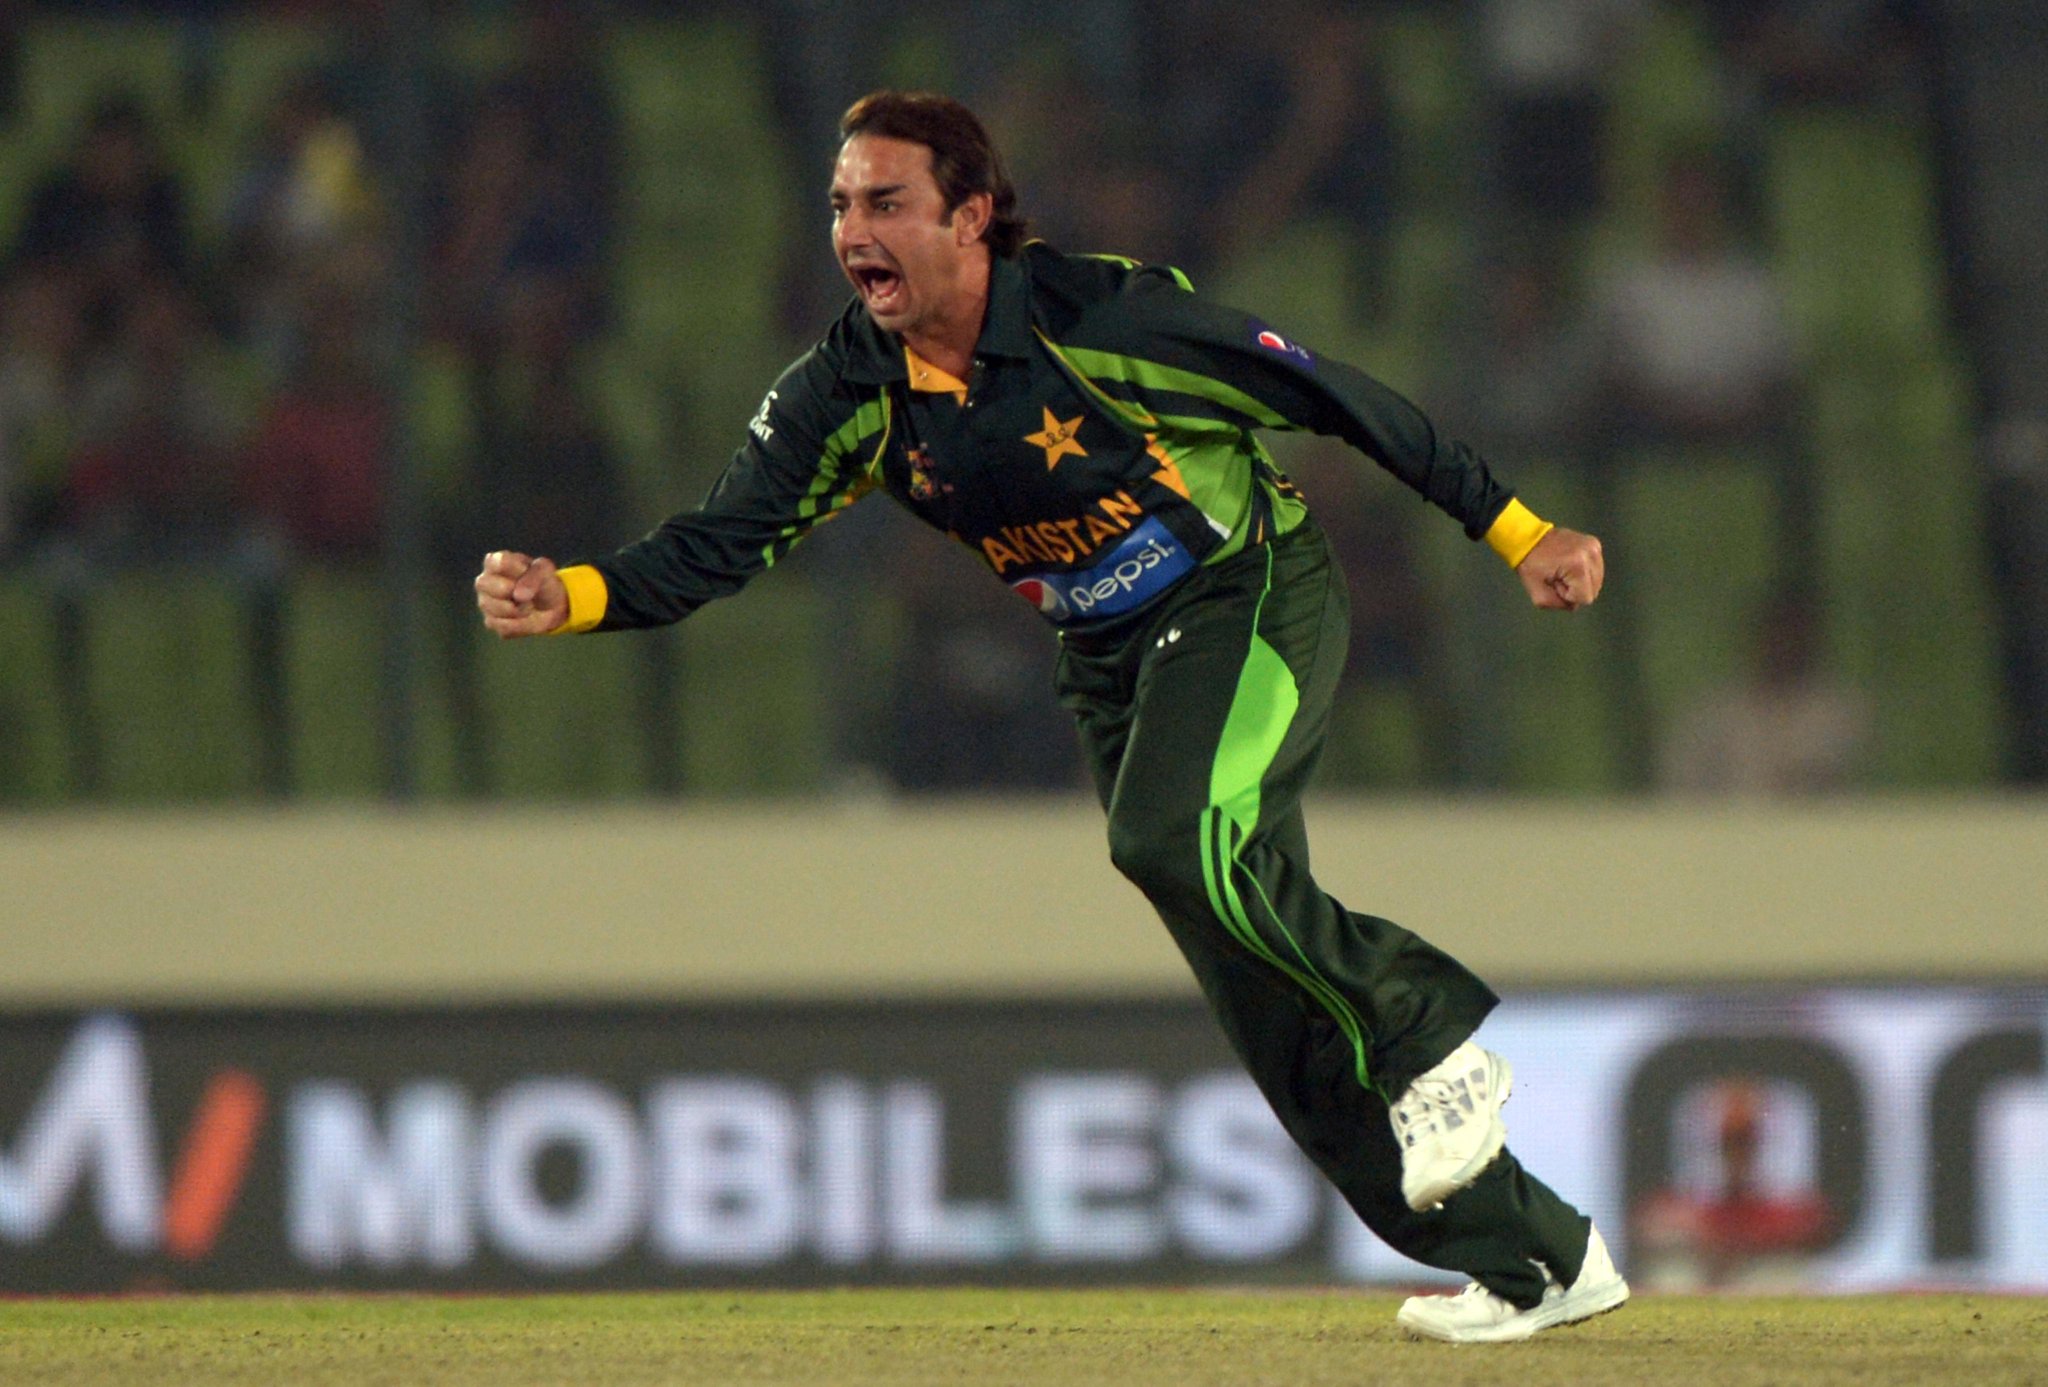 Wishing former  spinner Saeed Ajmal, who scalped up 447 wickets in 212 international matches, a happy birthday 